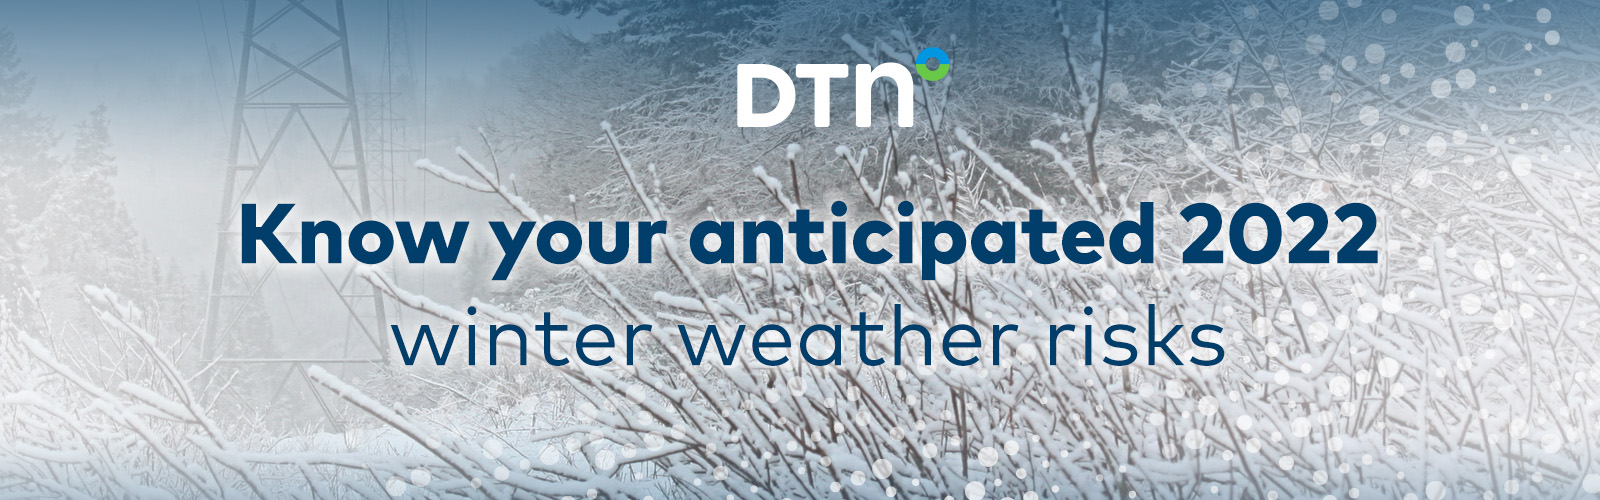 Know your anticipated 2022 winter weather risks